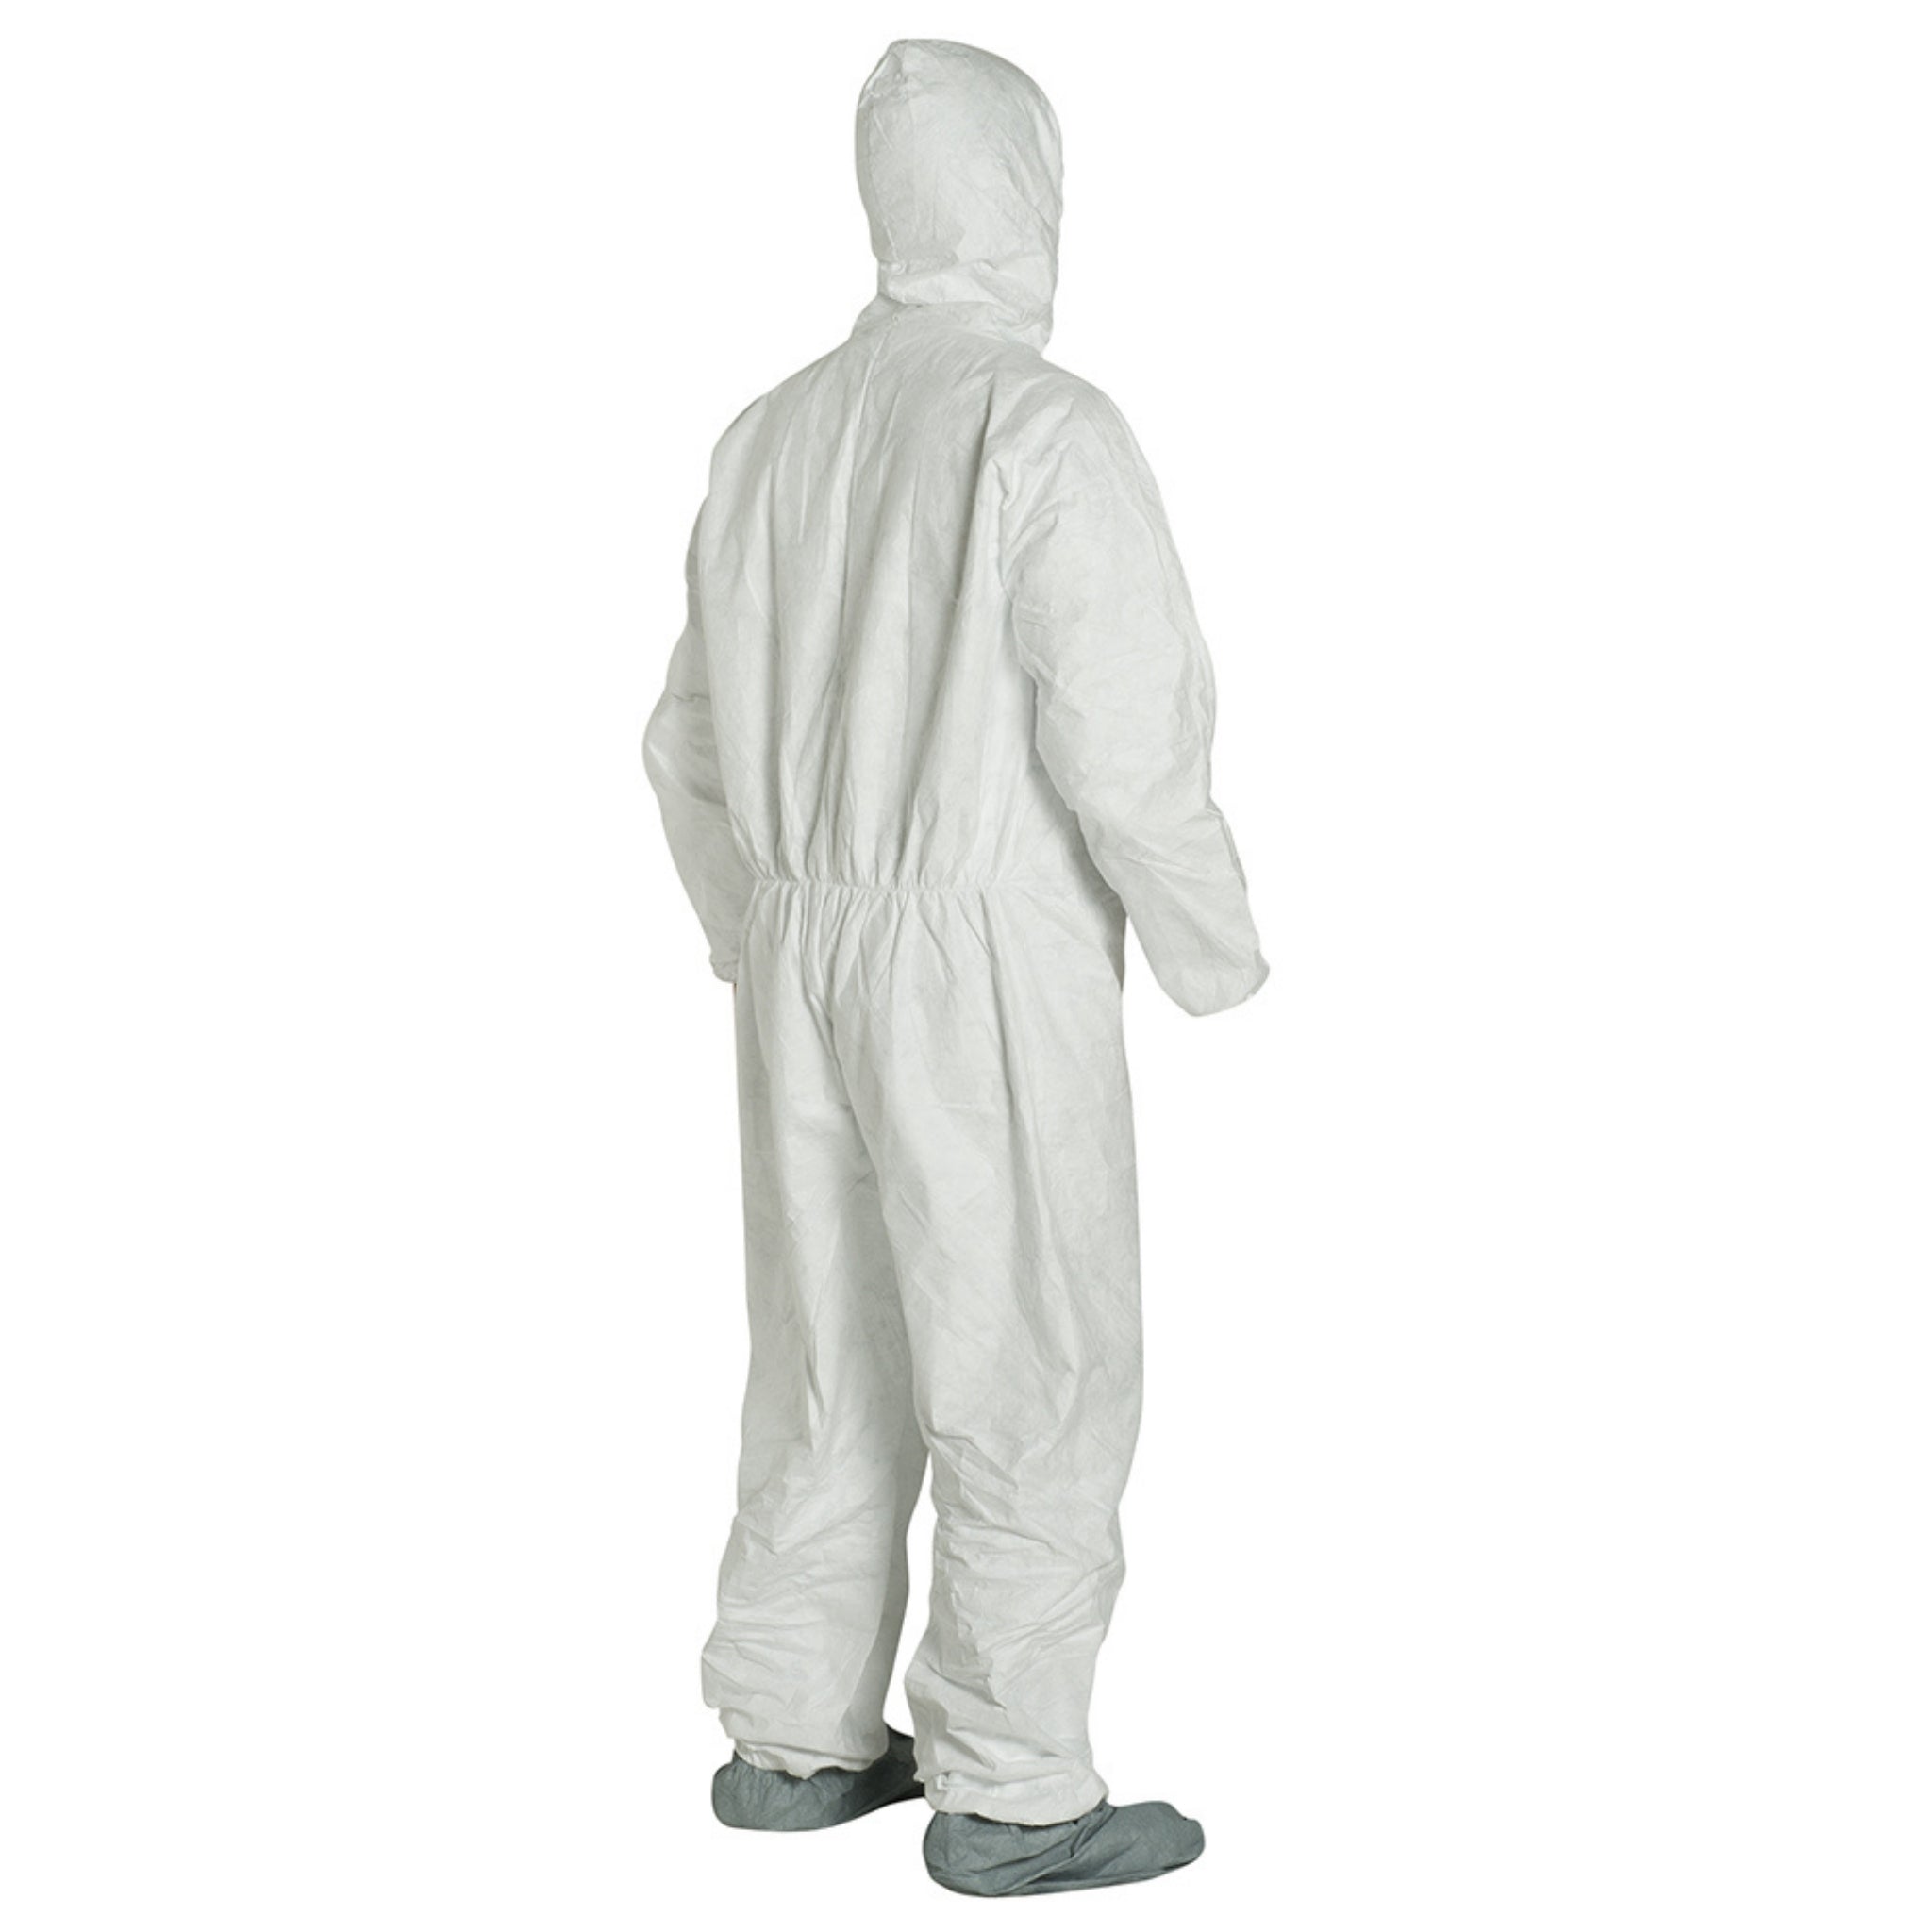 DuPont TY122S- 1 Suit: Tyvek 400 Disposable Protective Coverall, White